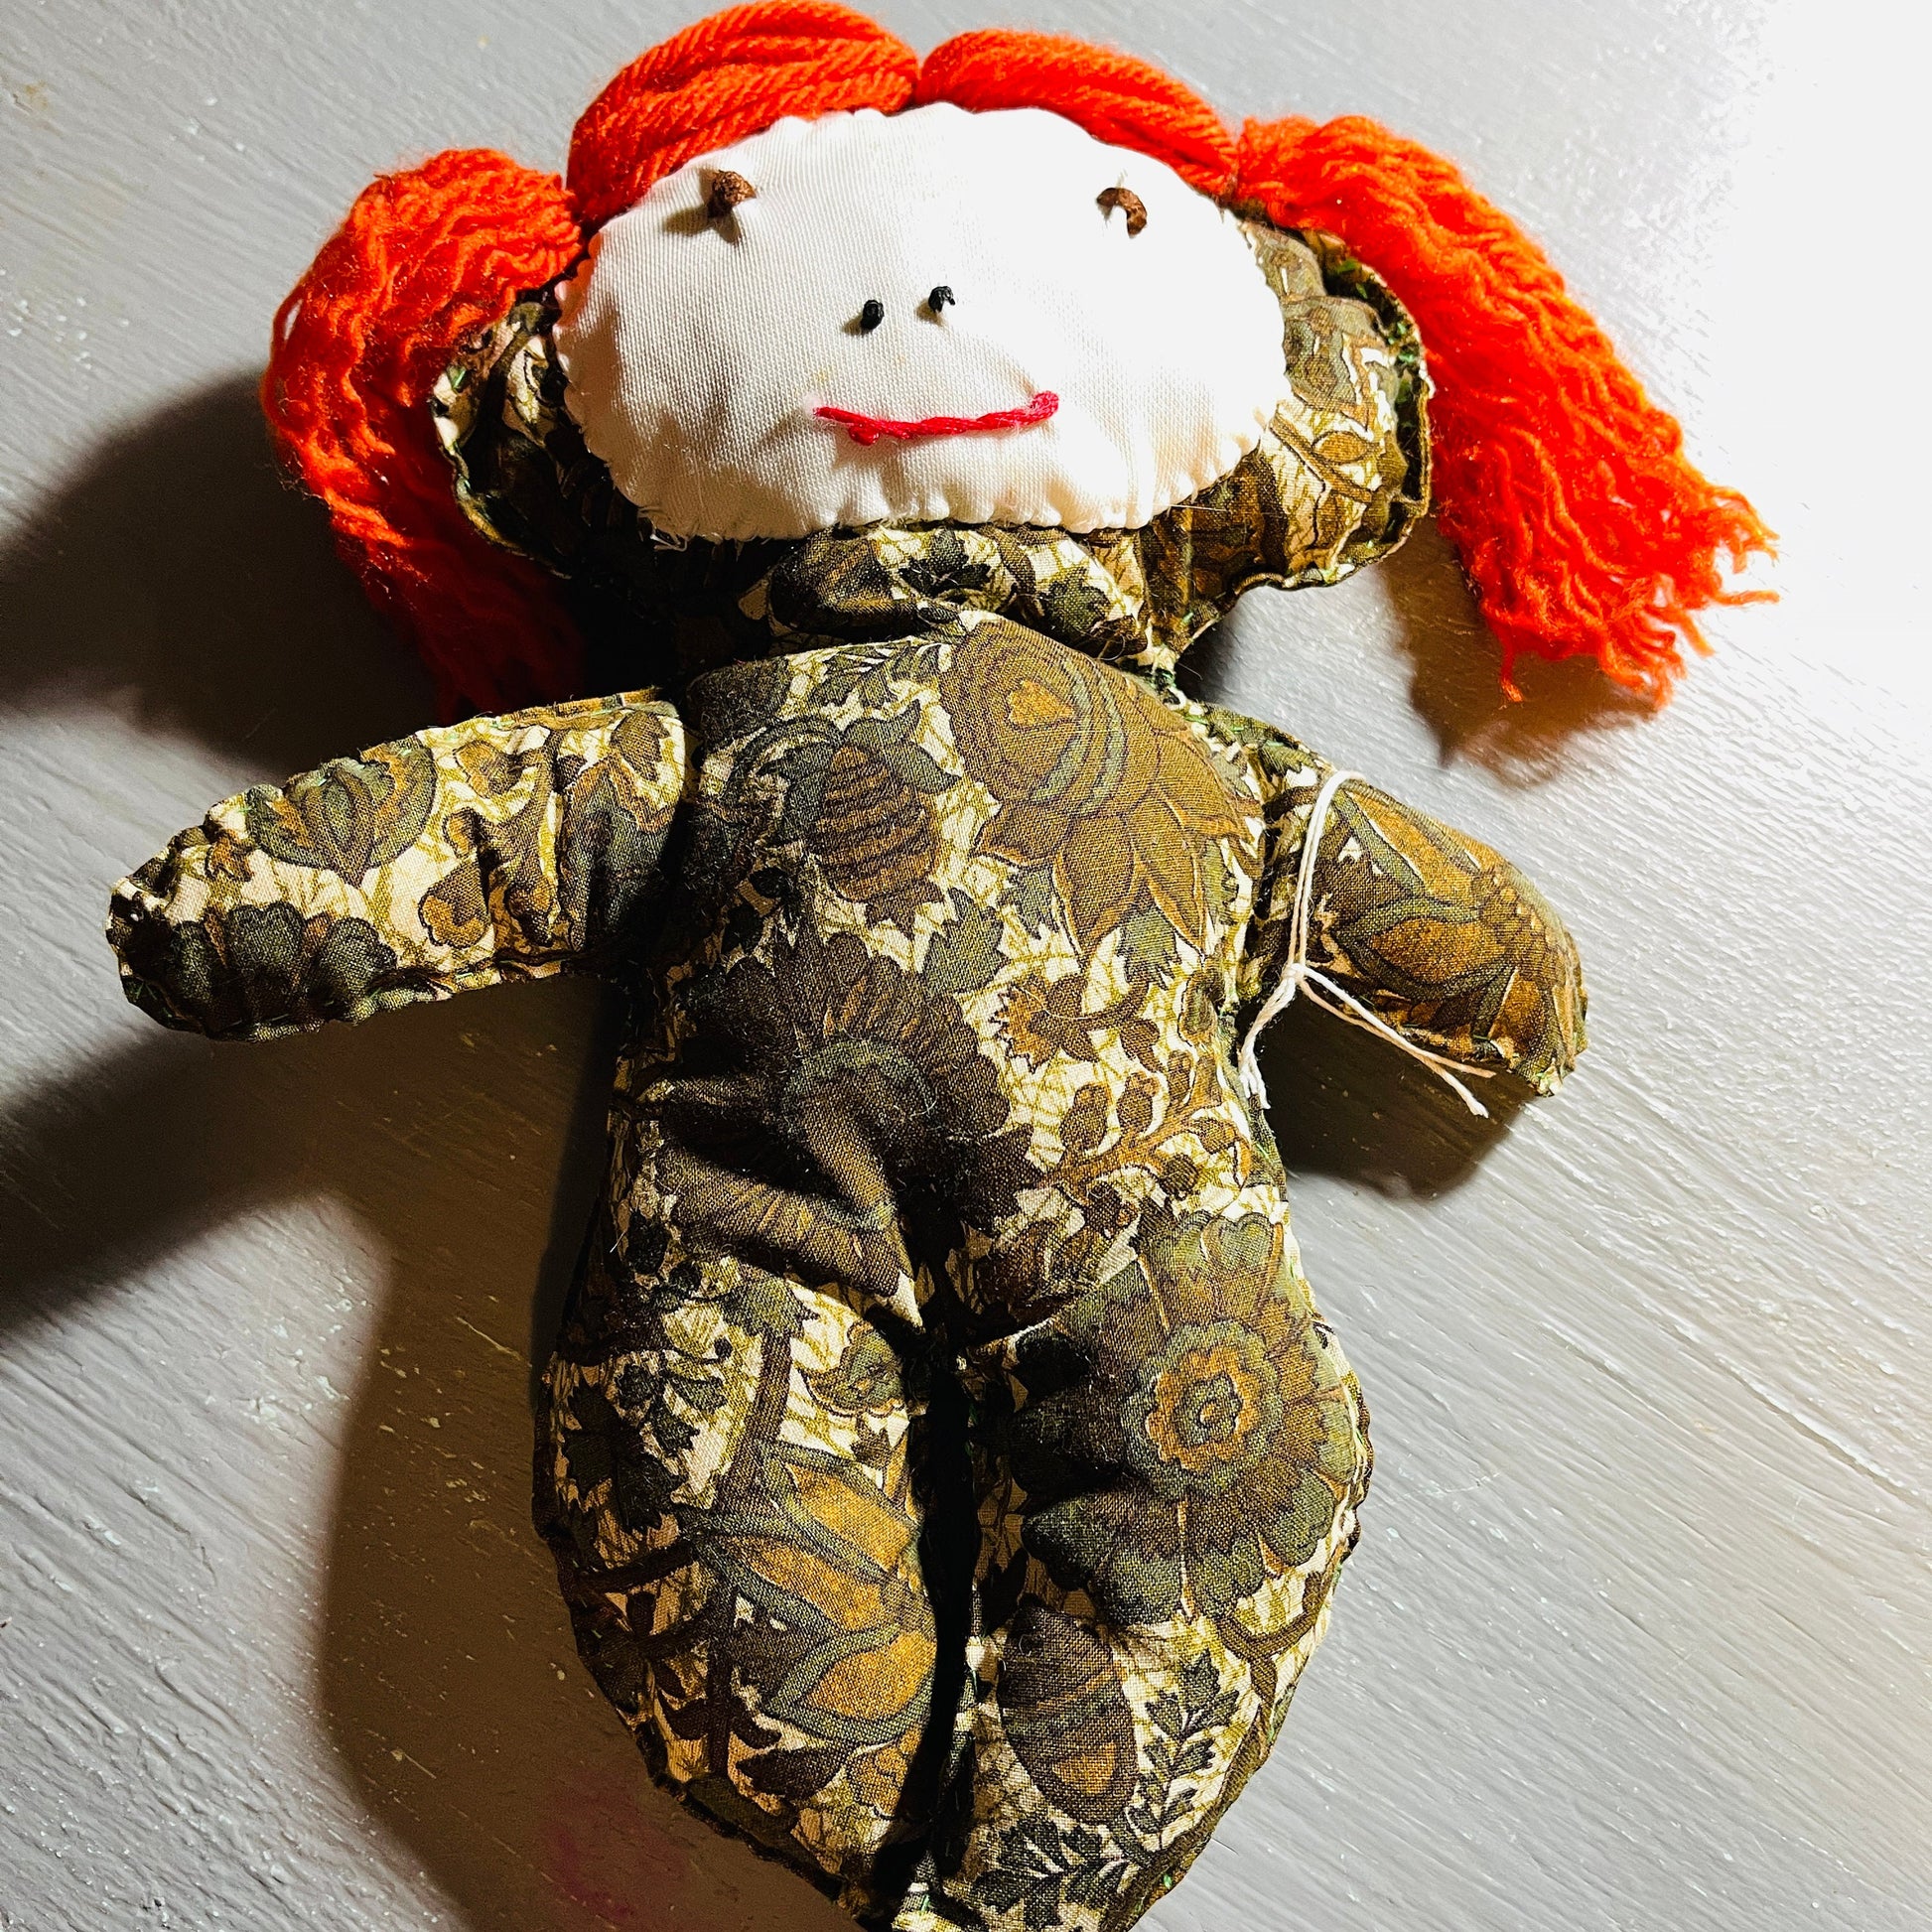 Primitive Handmade Floral Print Doll with Red Yarn Hair, Vintage Collectible